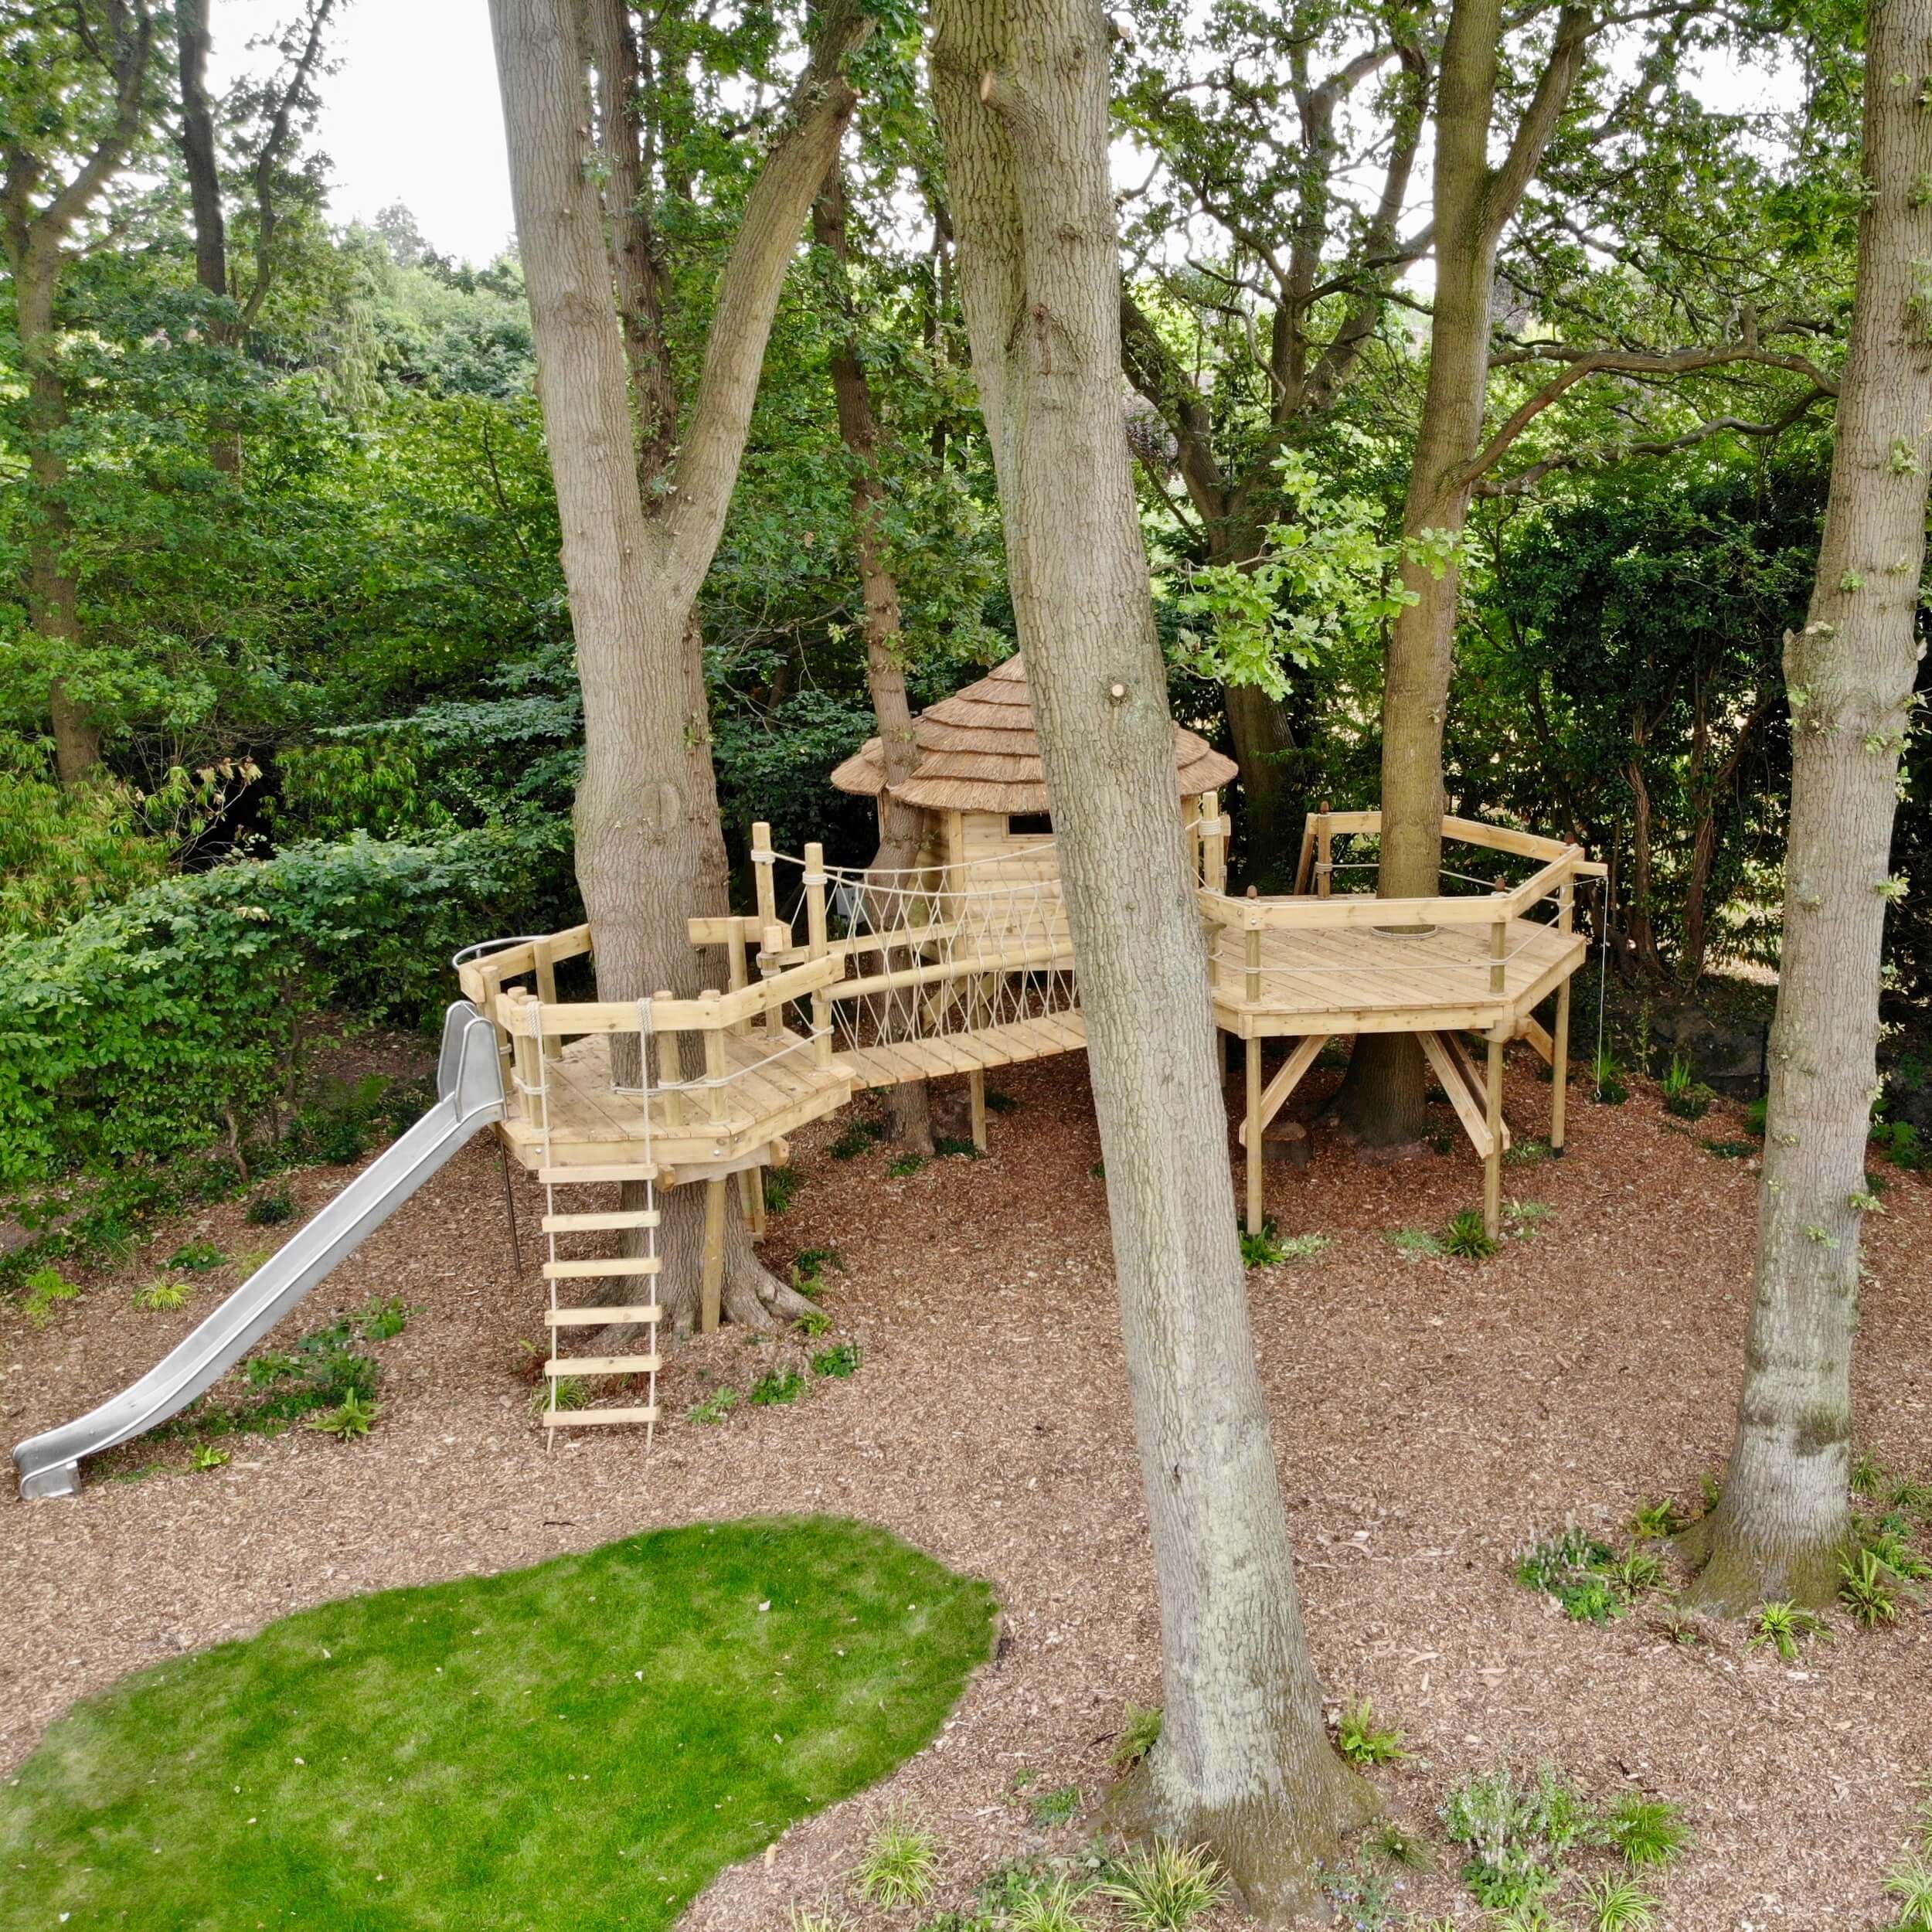 Treehouse Rope Bridge - Landscape garden project — Rope Bridge projects -  UK and Worldwide - Design and Install